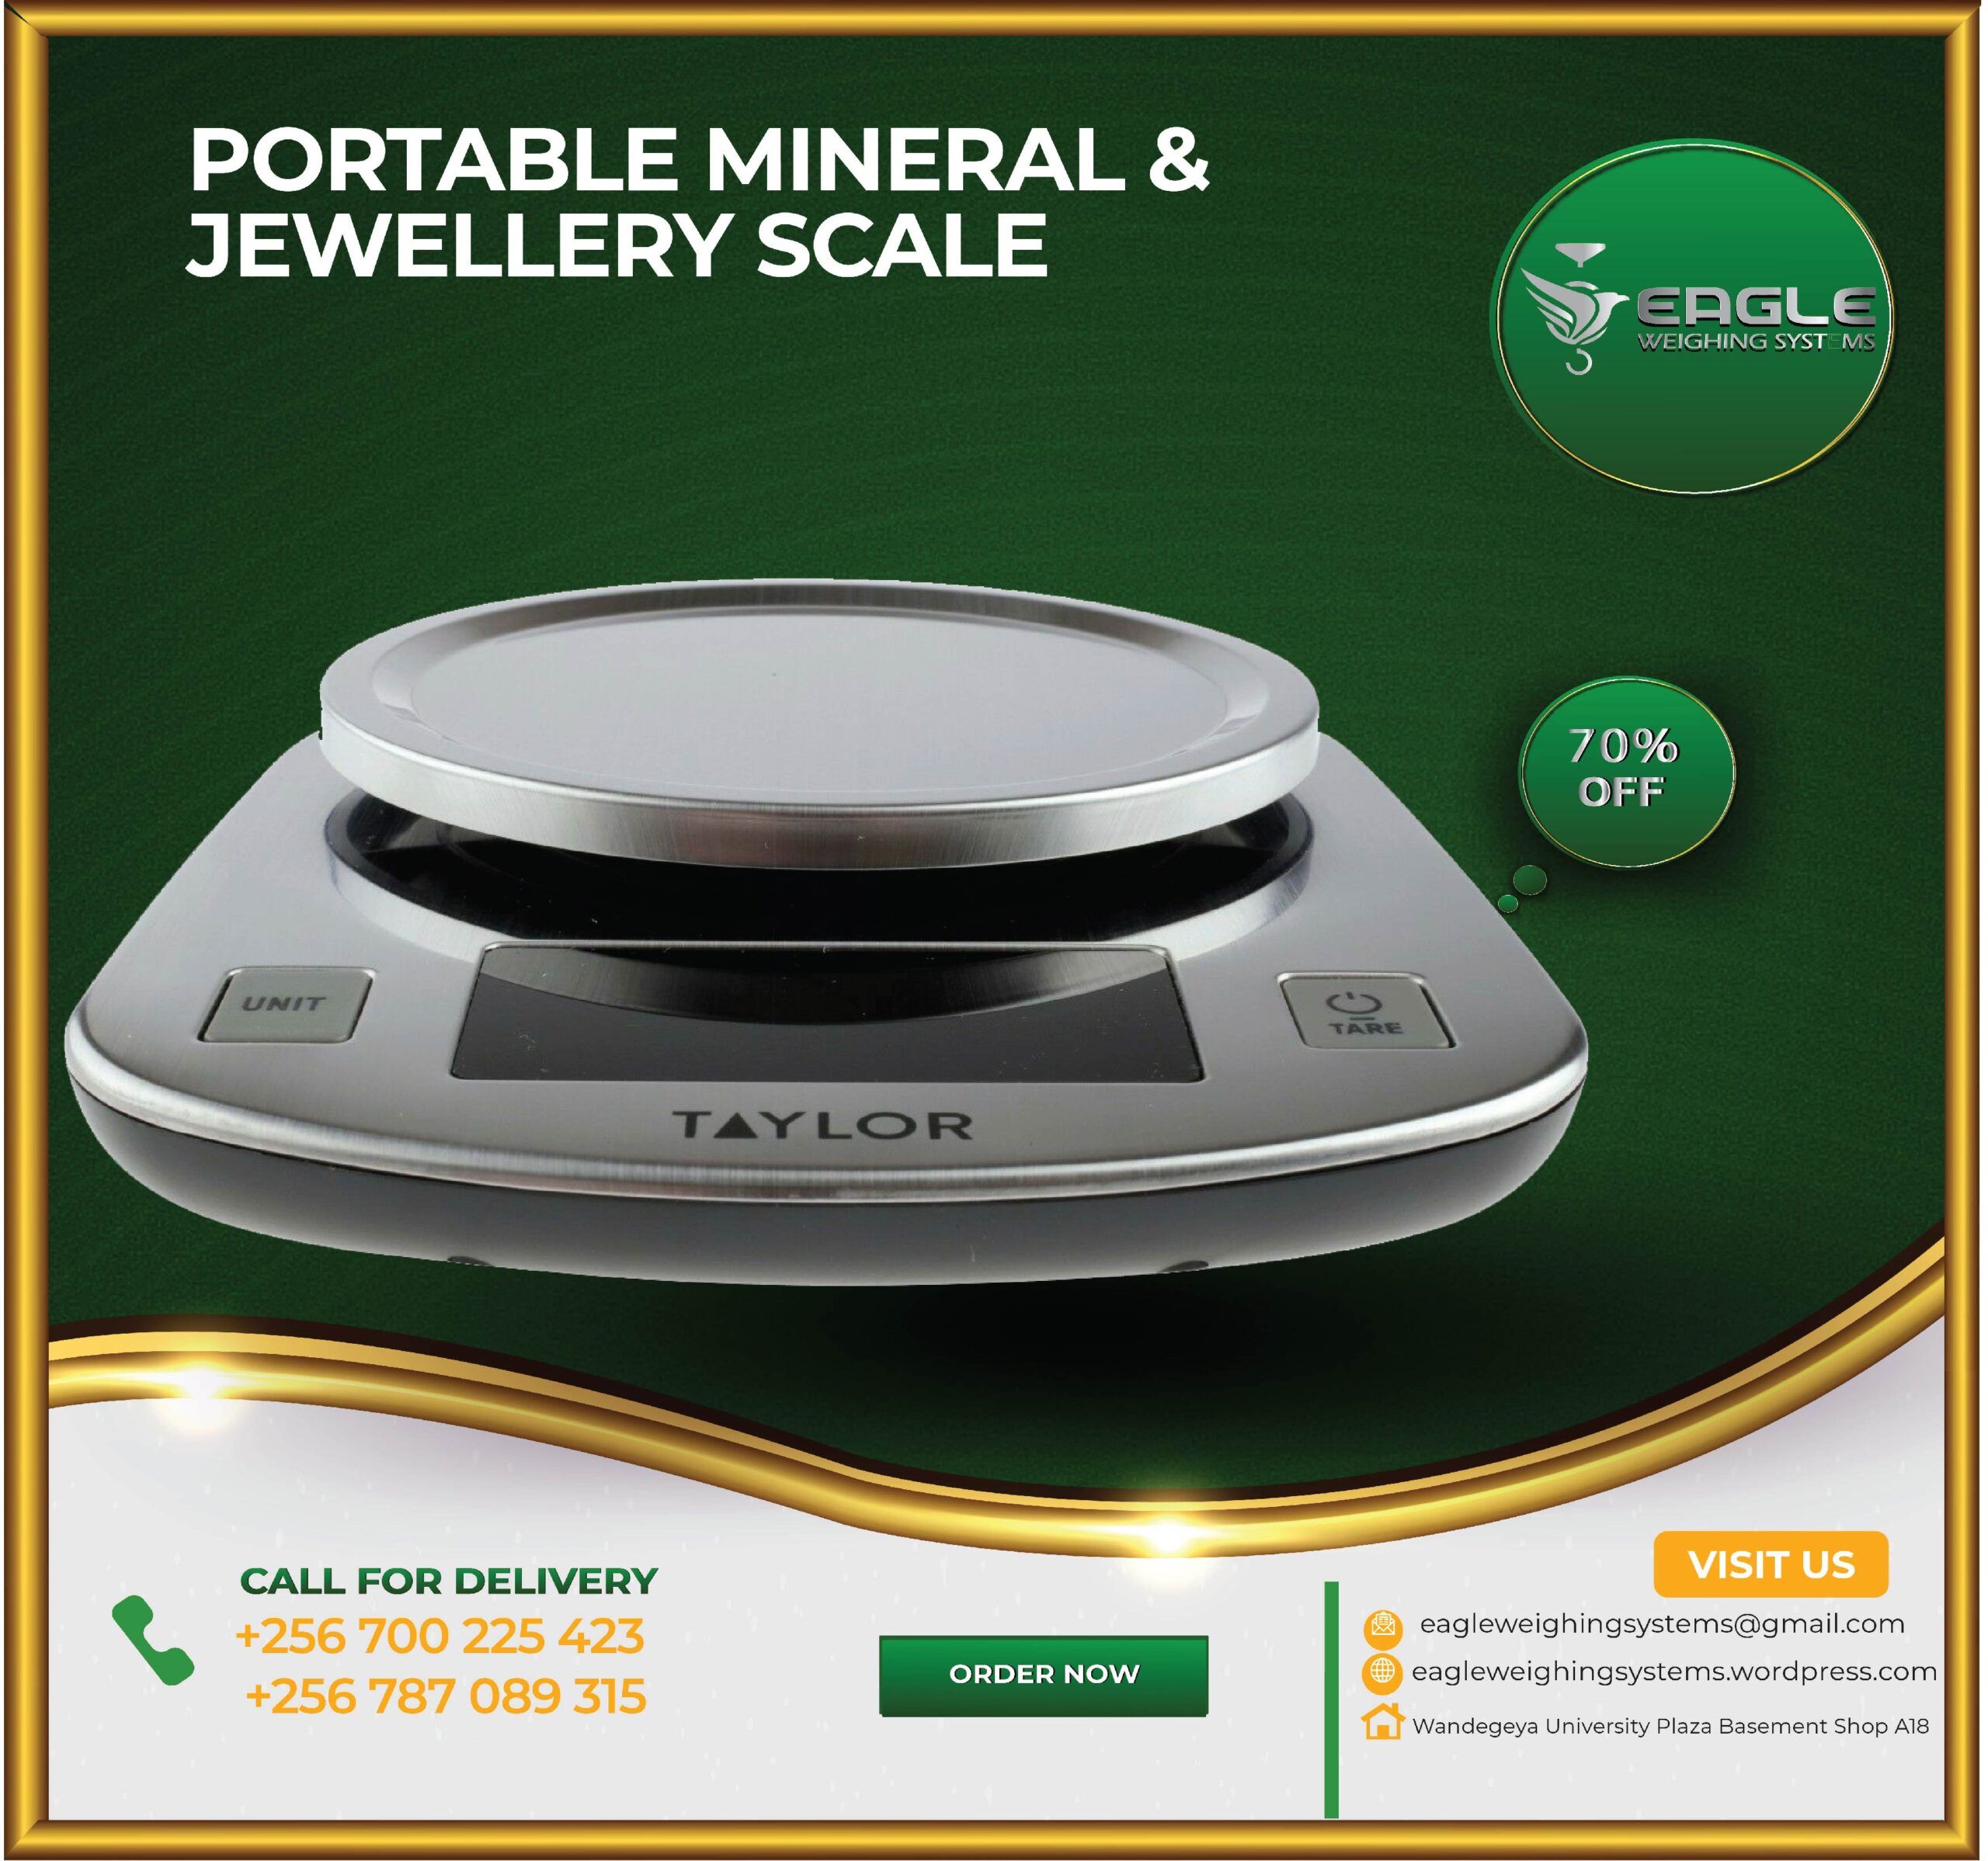 20g/30g/50g/0.001g Pocket scale mineral weighing scale in Kampala